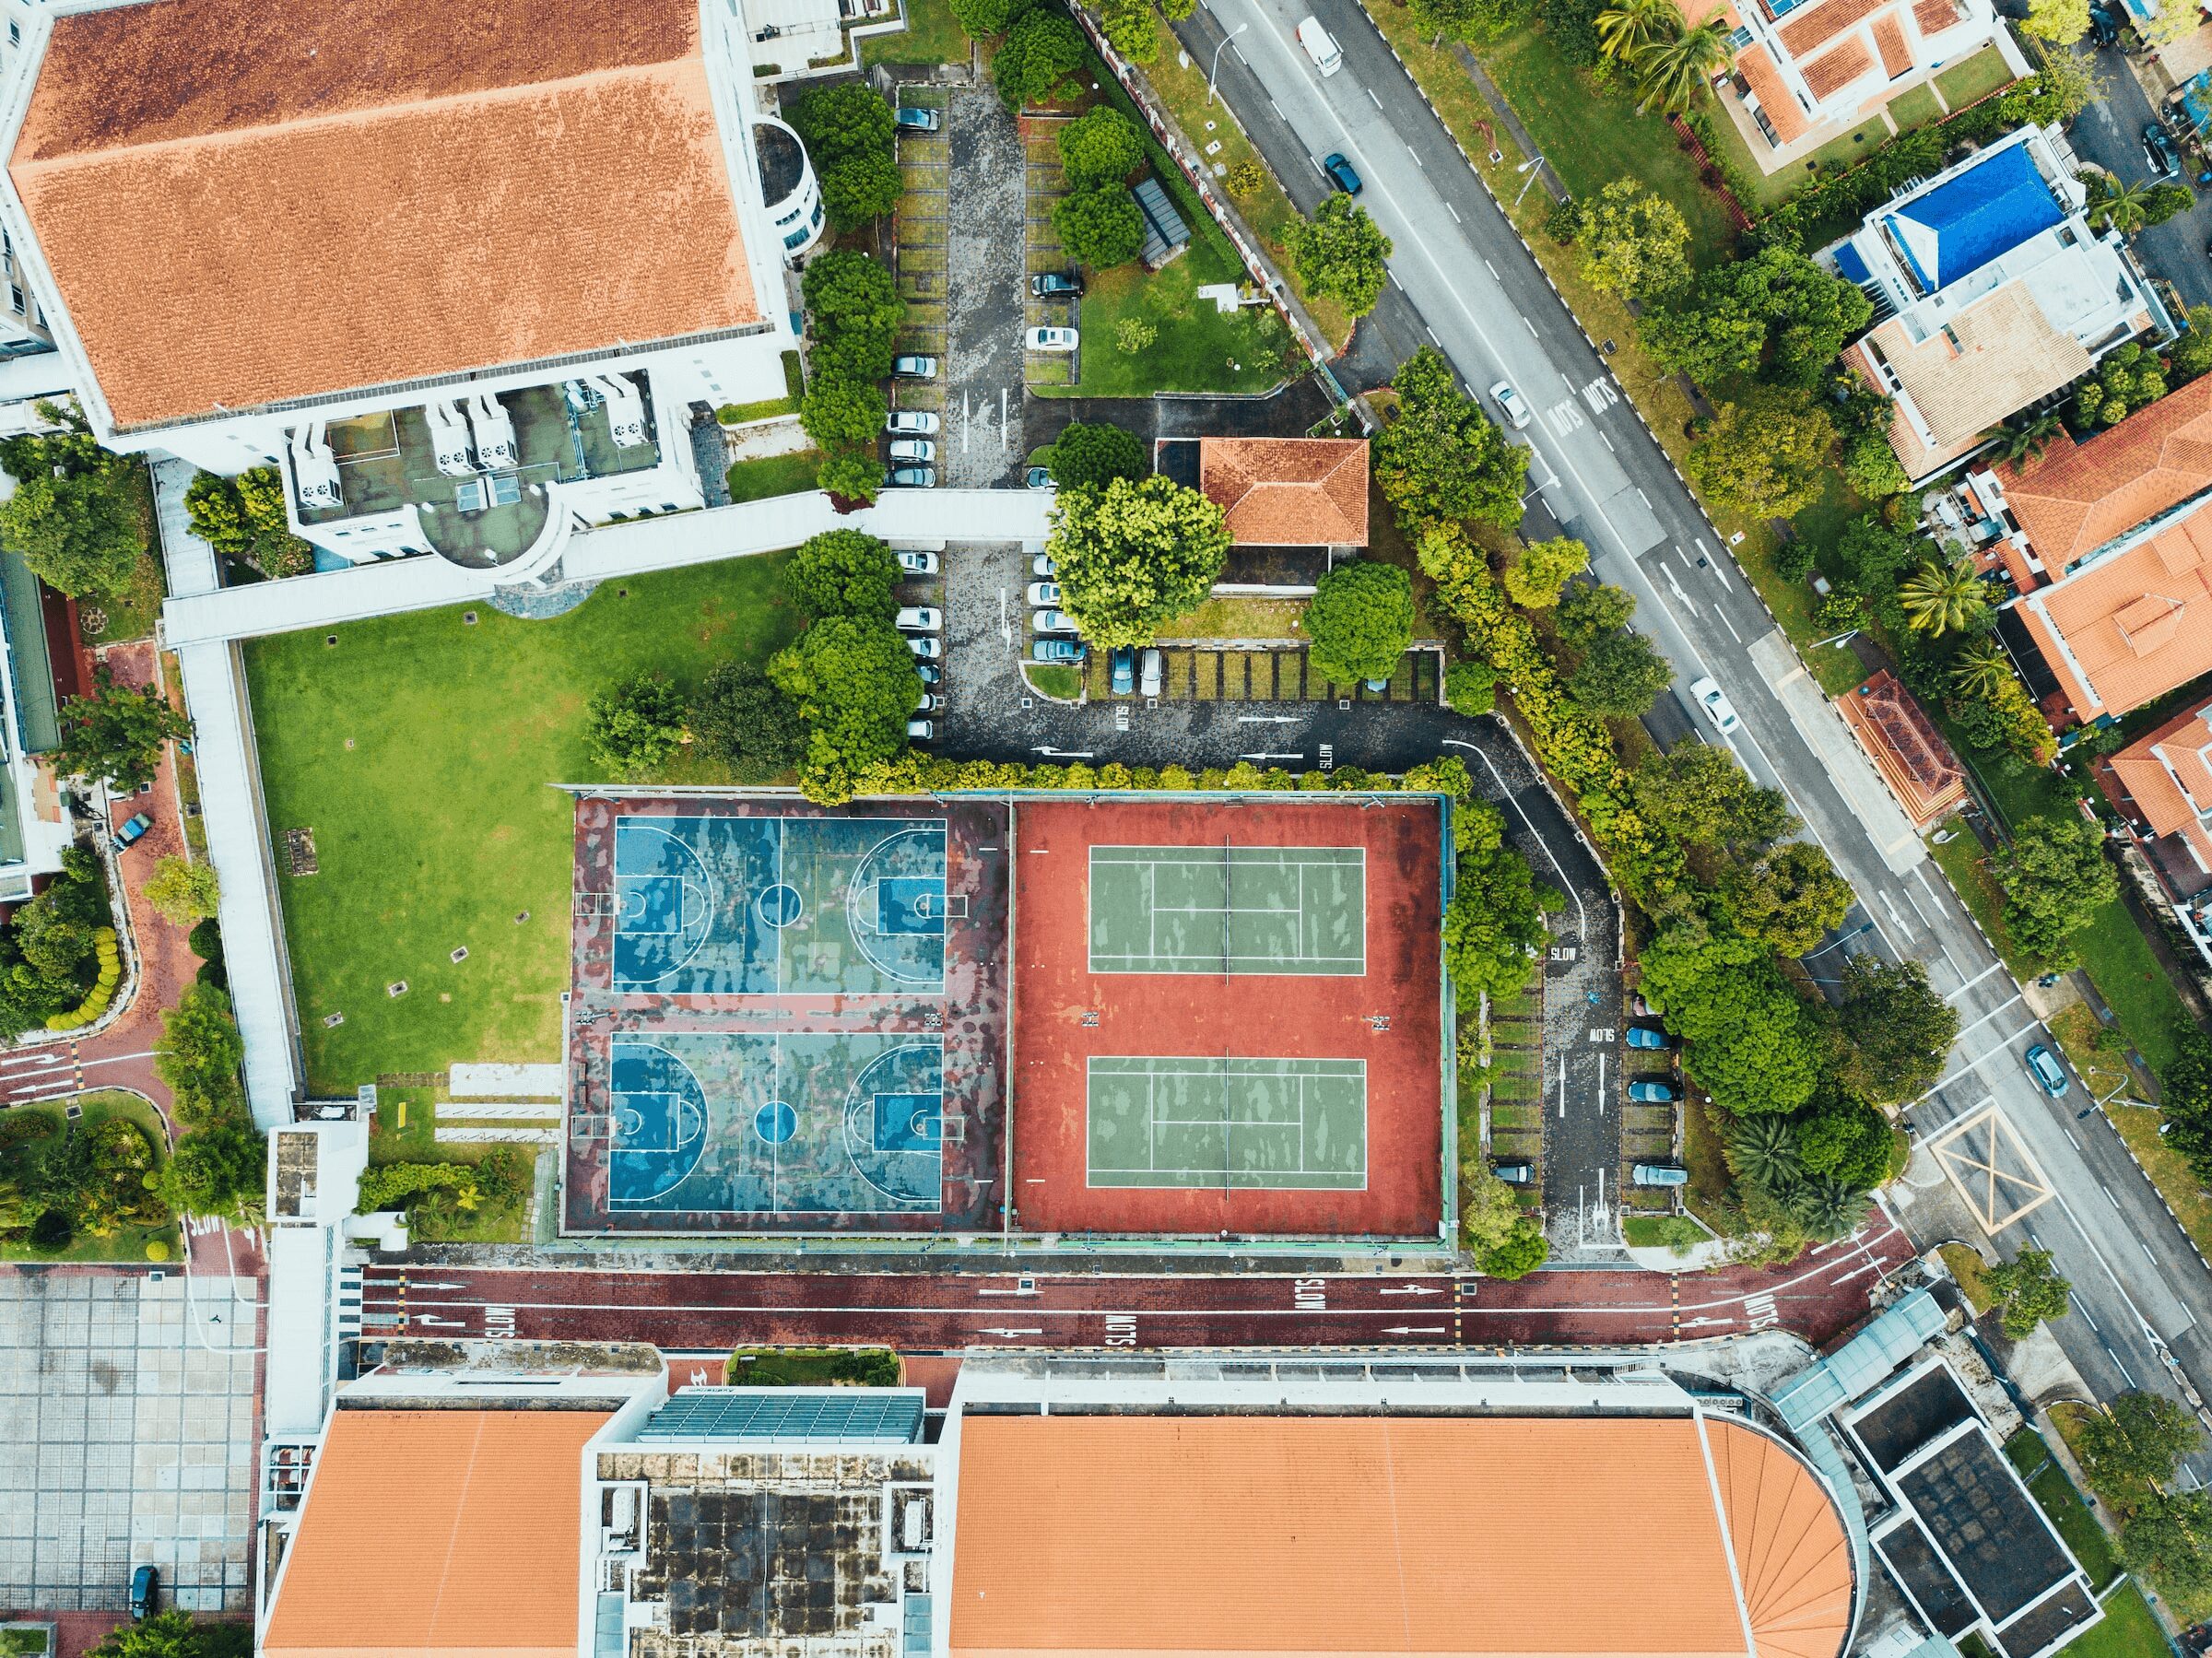 Tennis and basketball courts aerial view